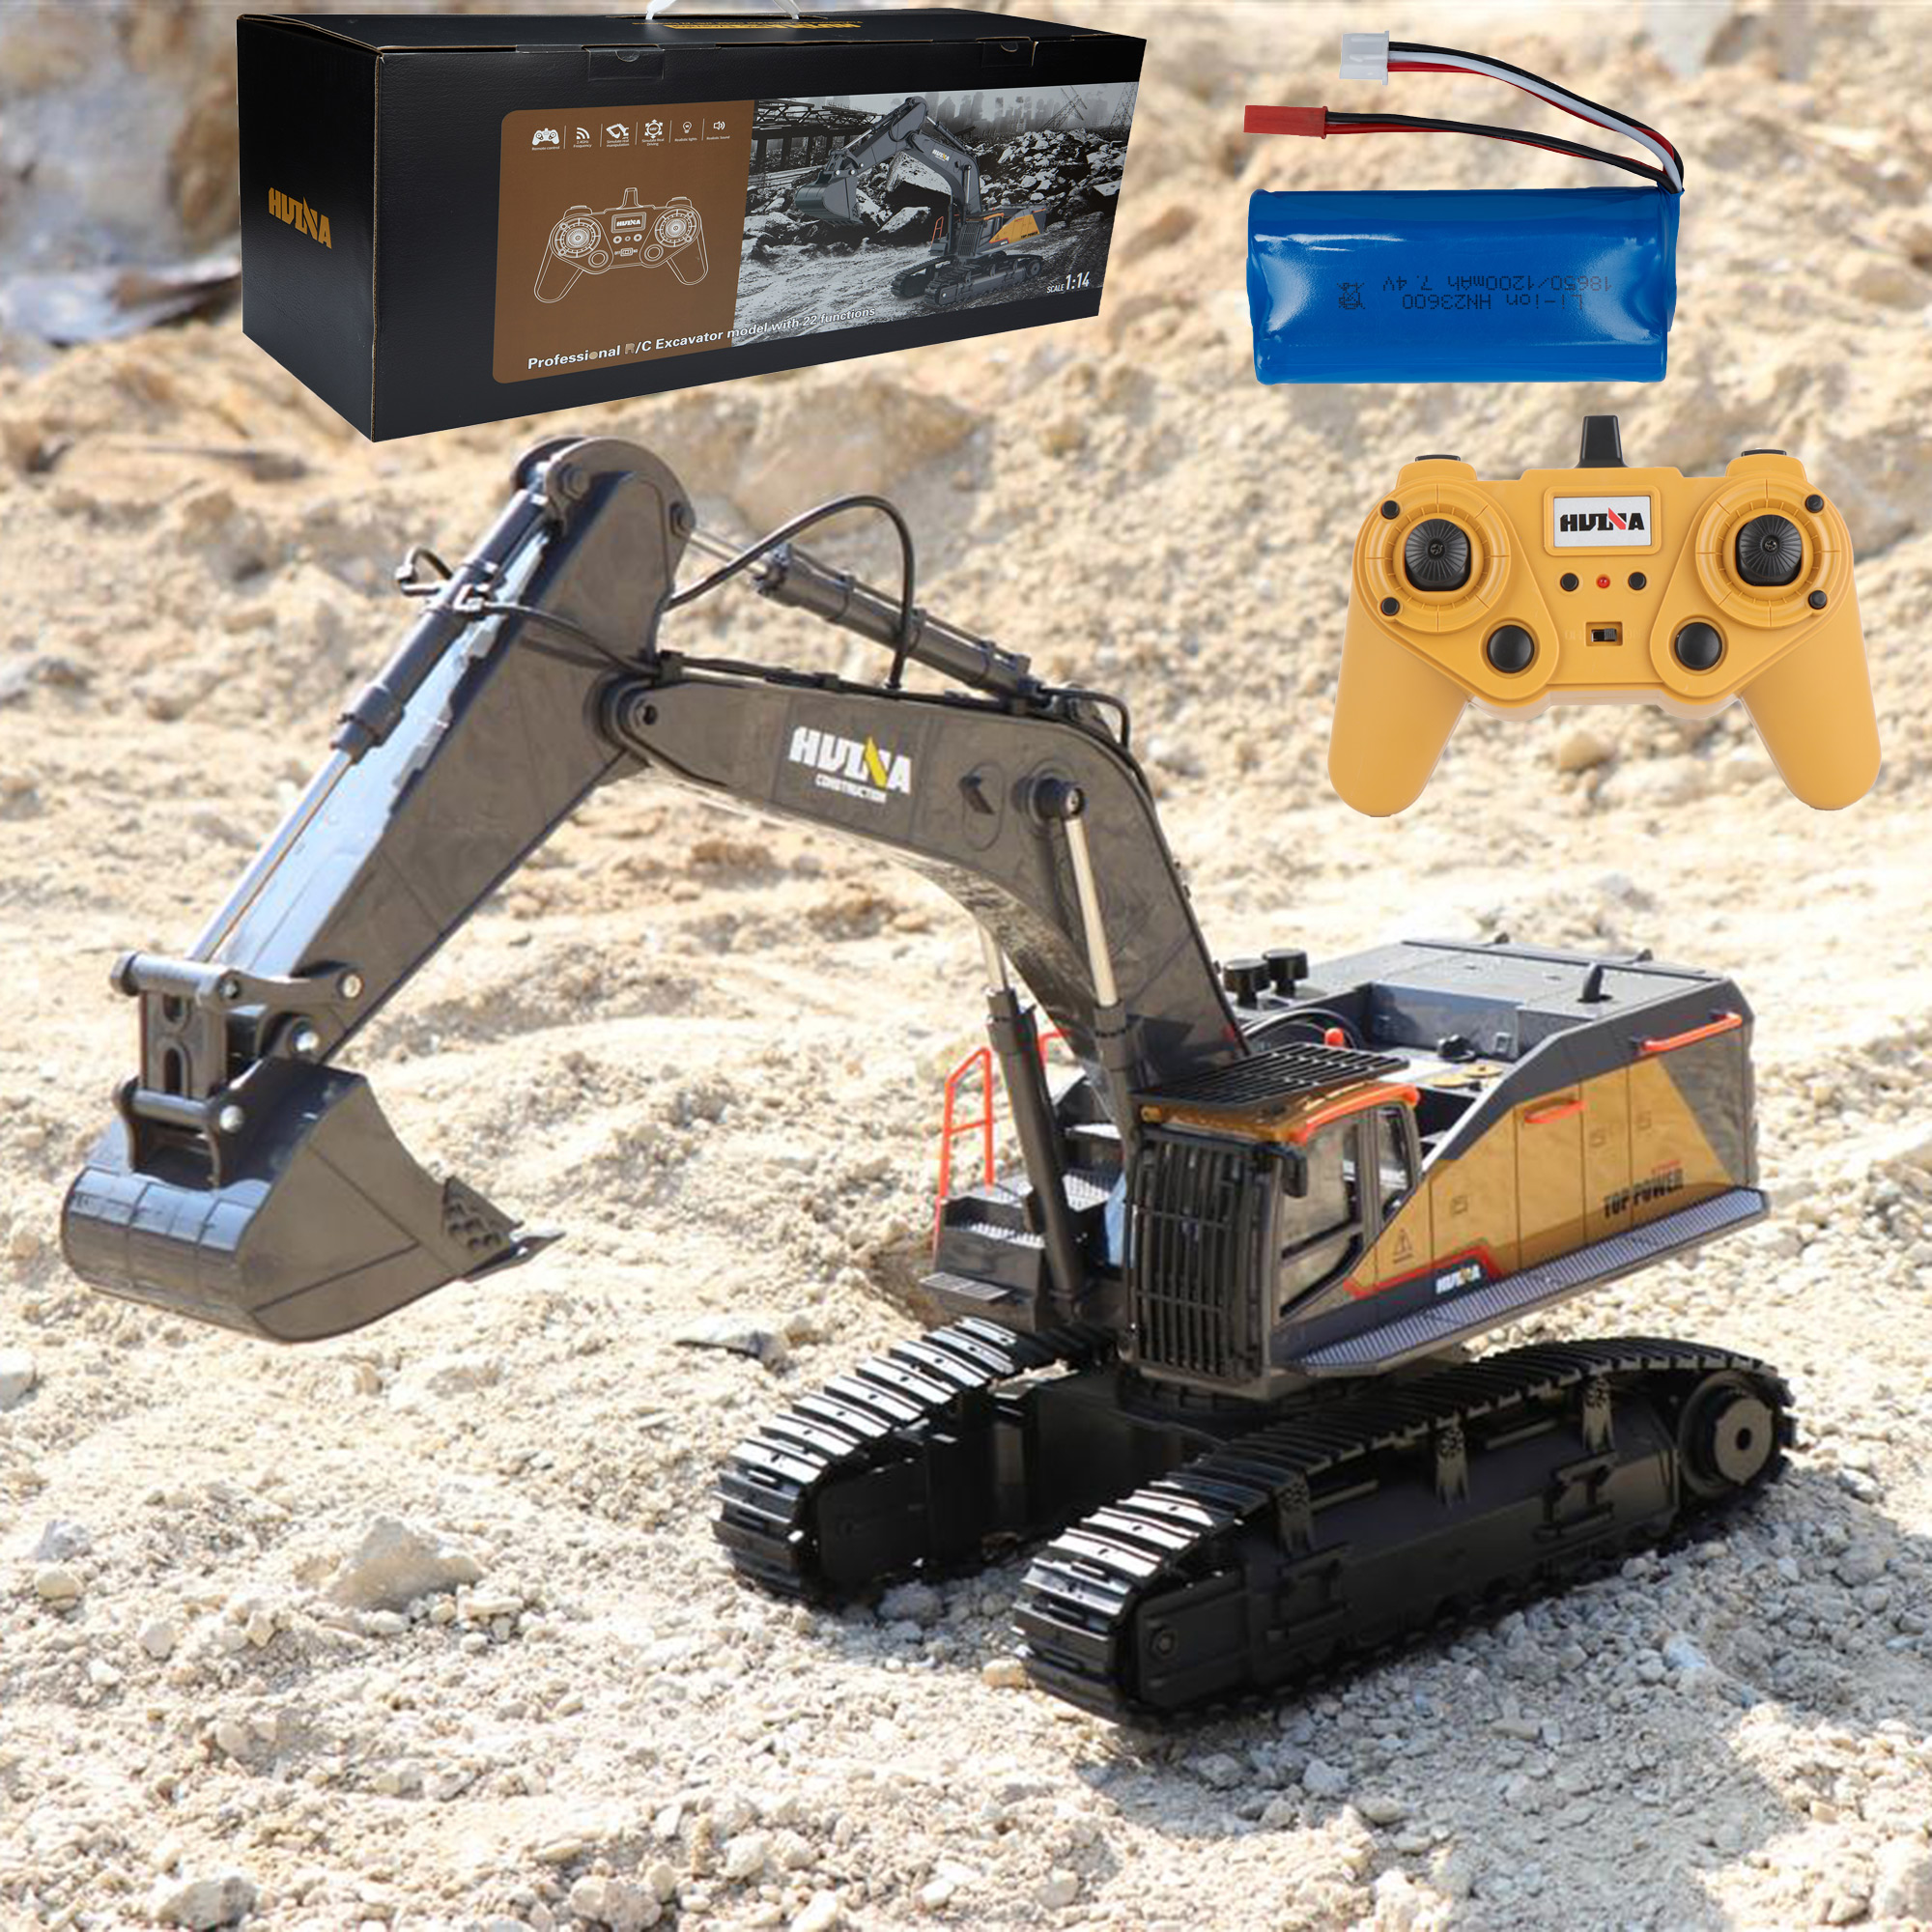 Excavator Toy Remote Control Excavator RC Truck Toy,22 Channel Rechargeable RC Truck Mini Construction excavator1/24 Scale RC Excavator Construction Vehicles Gifts - image 1 of 8